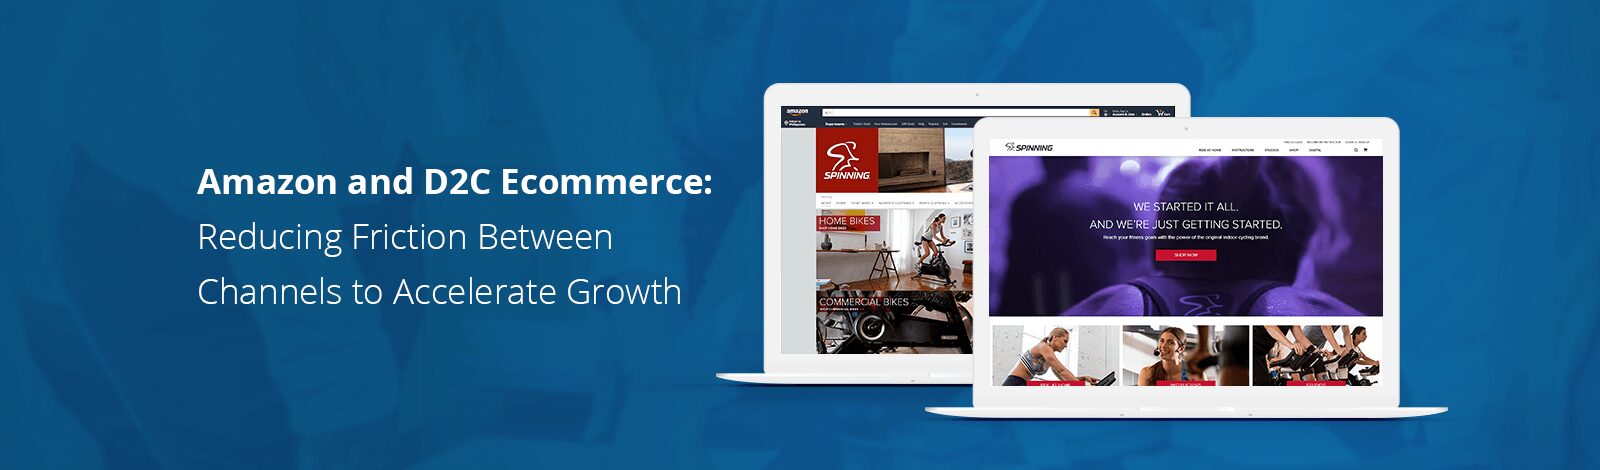 Amazon & D2C Ecommerce: Reducing Friction to Accelerate Growth